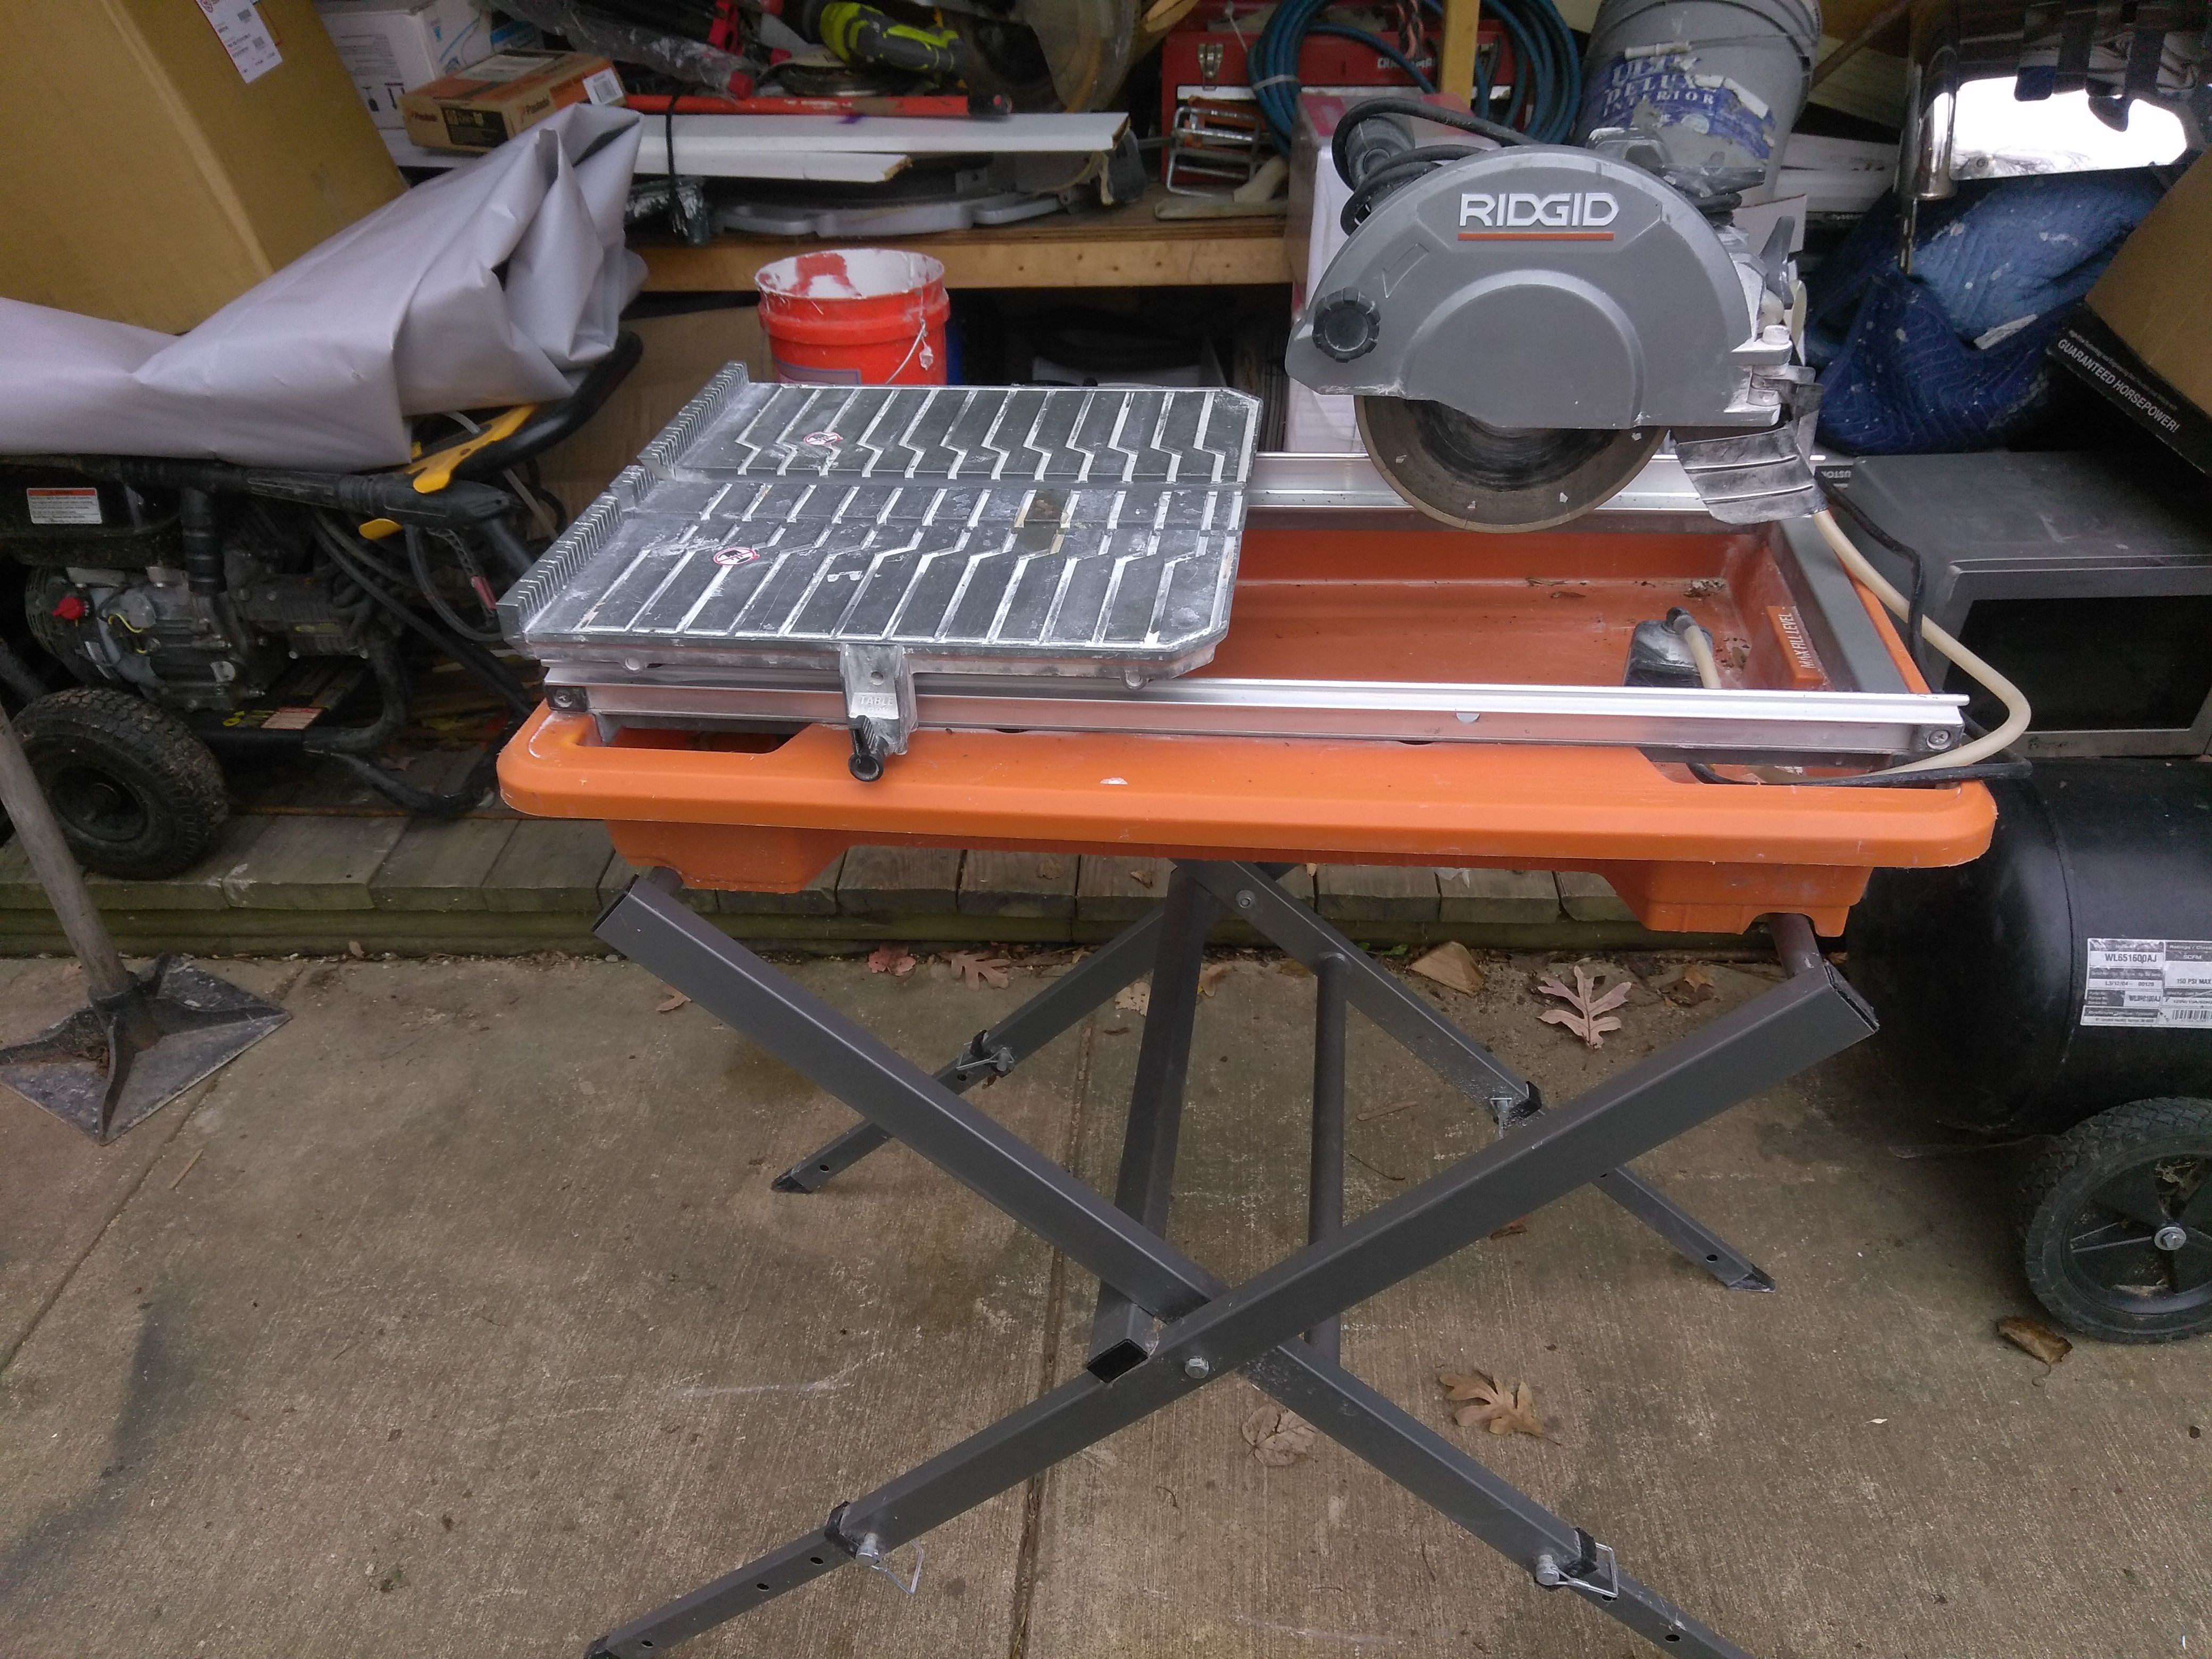 Ridgid tile saw in perfect condition price is firm